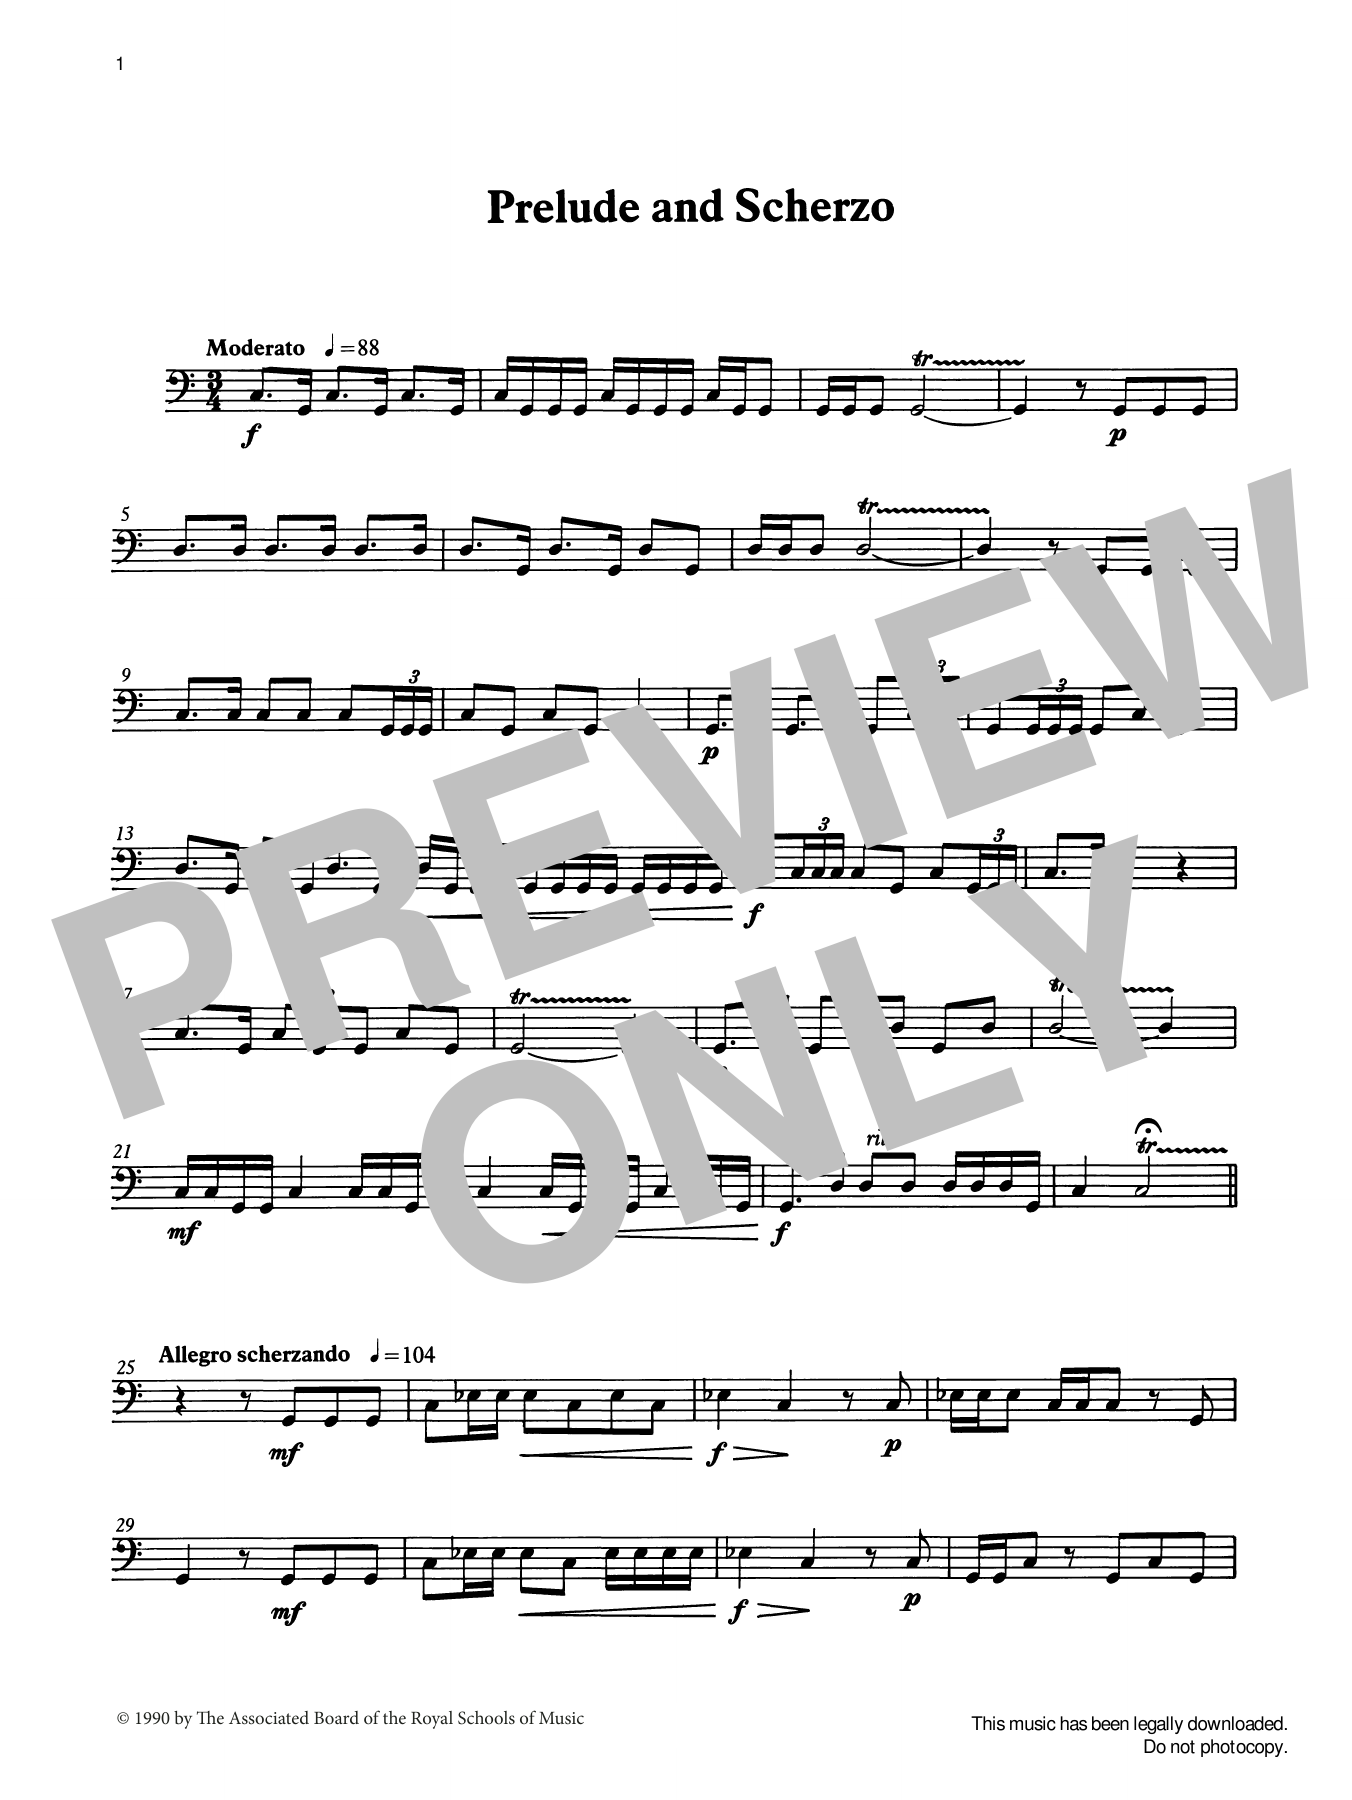 Download Ian Wright Prelude and Scherzo from Graded Music f Sheet Music